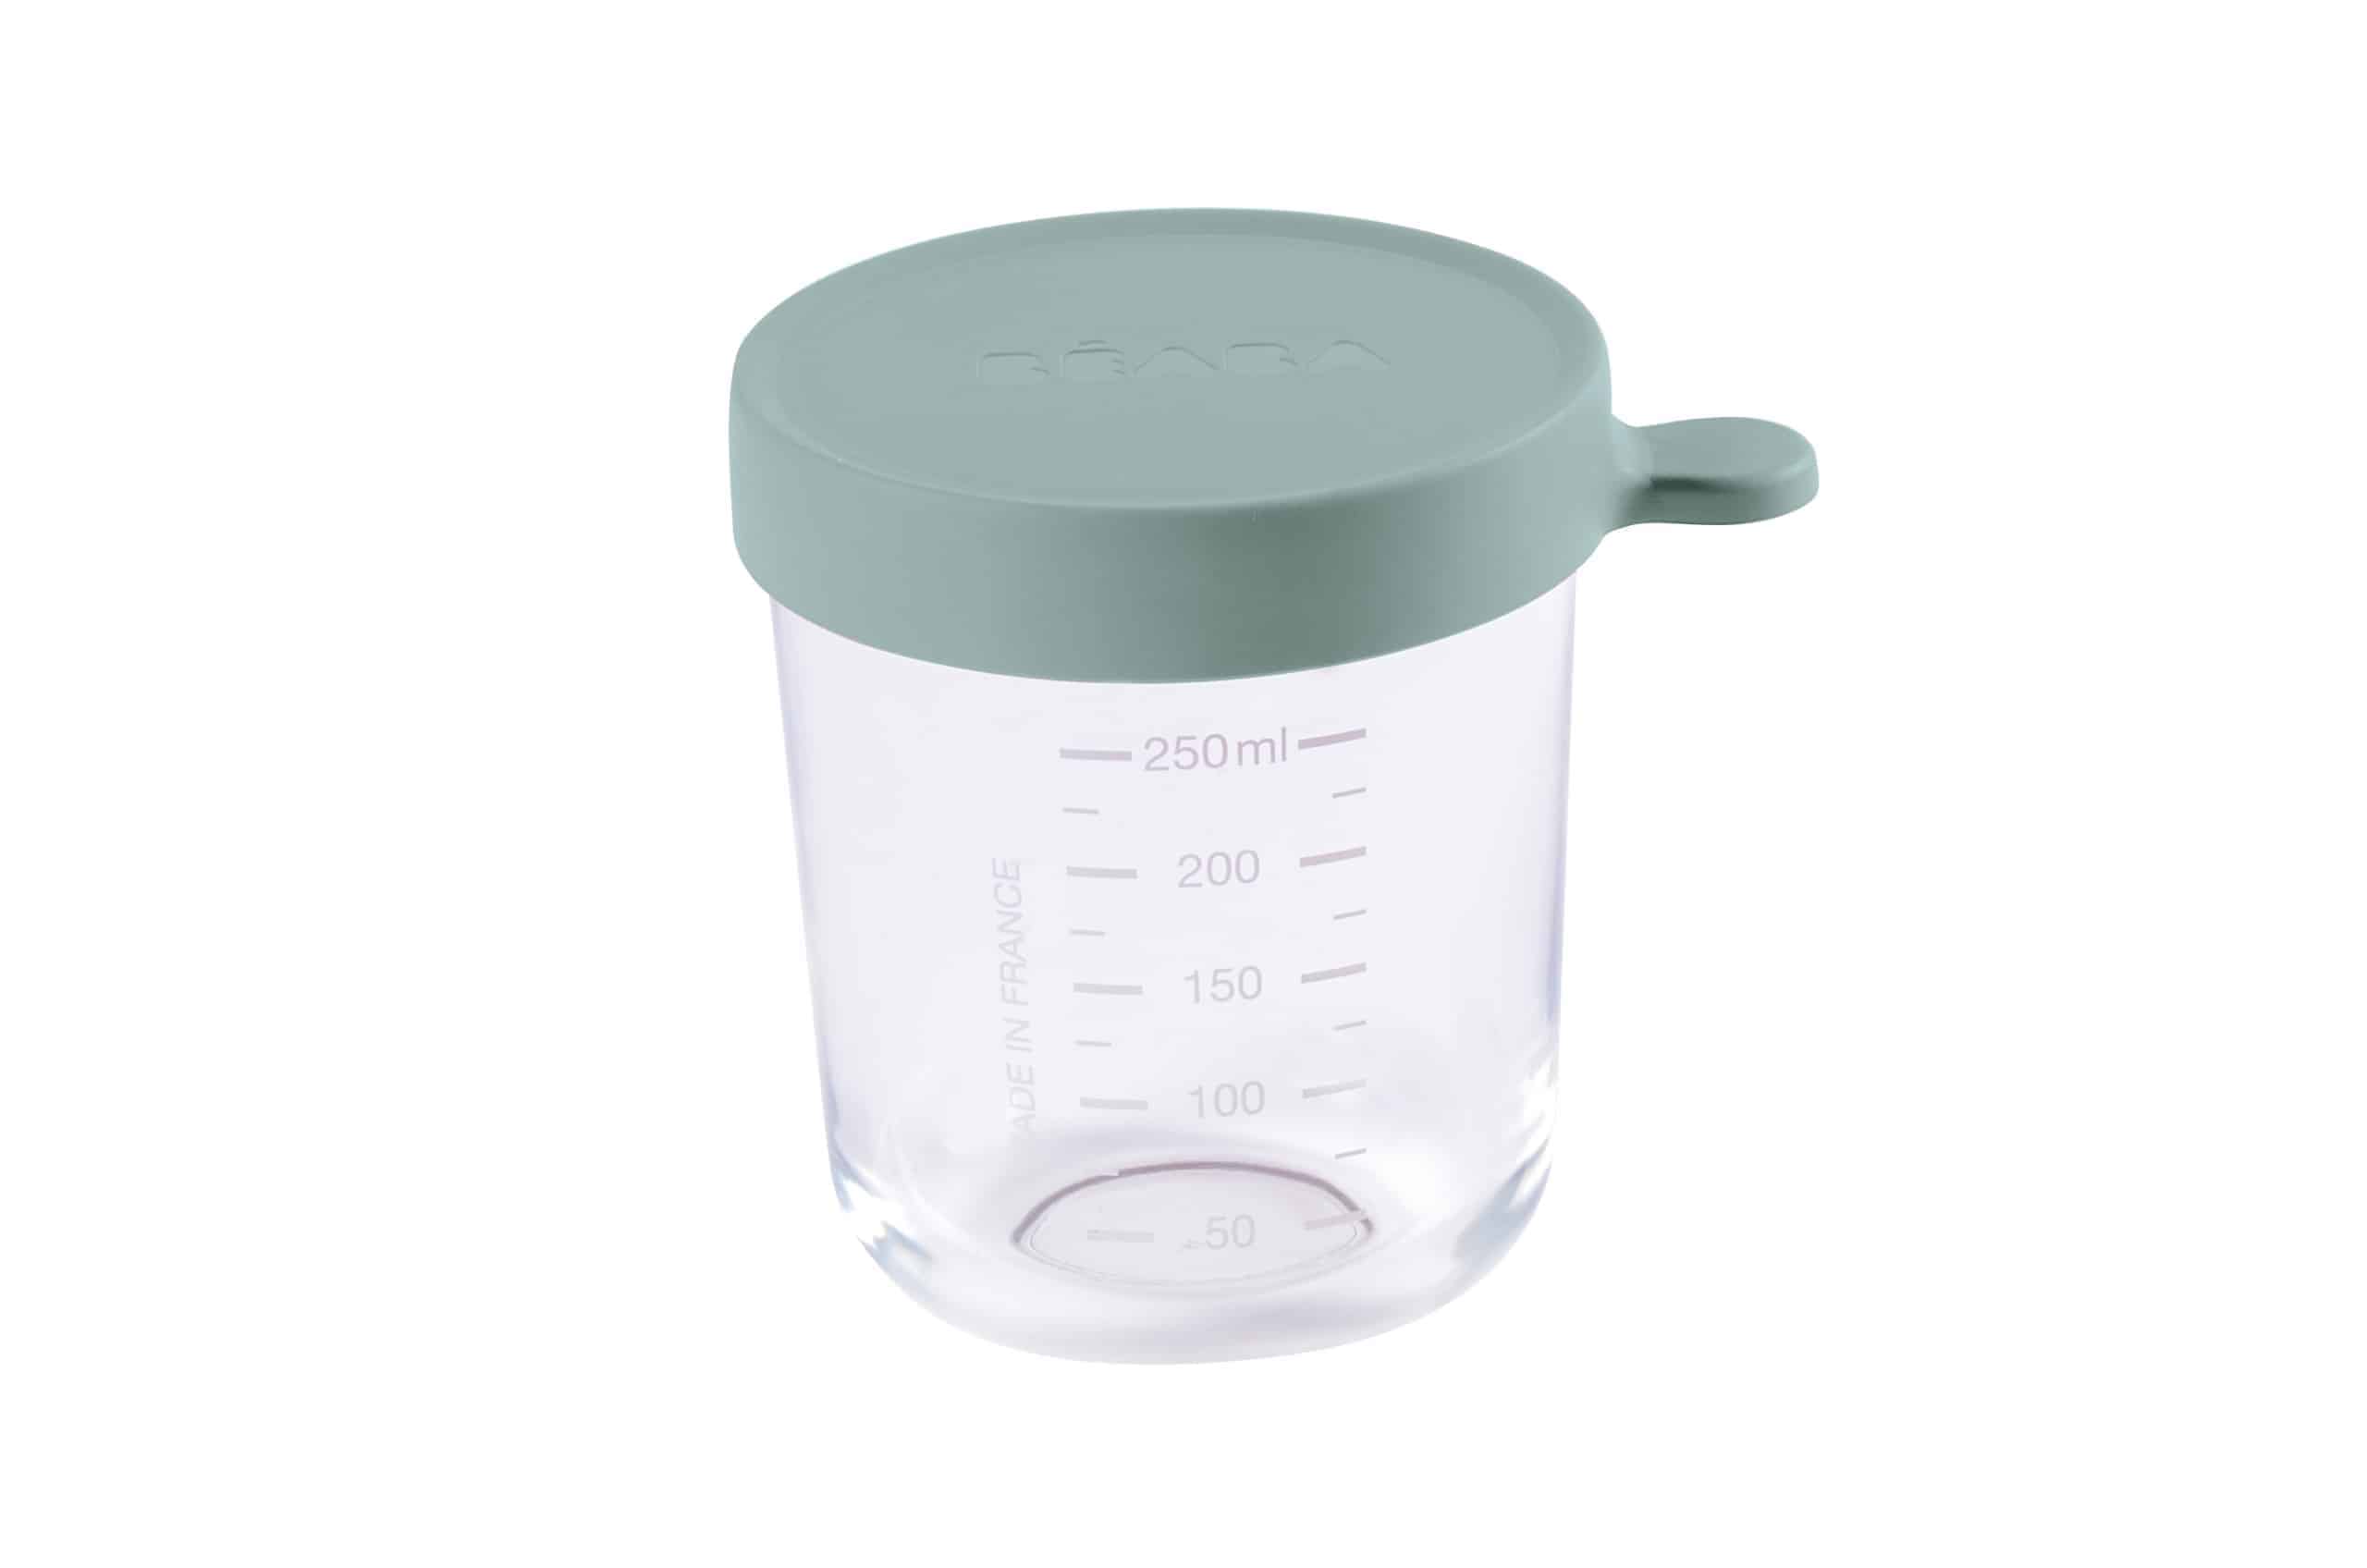 Beaba glass and Silicone Container in Eucalyptus 8 oz